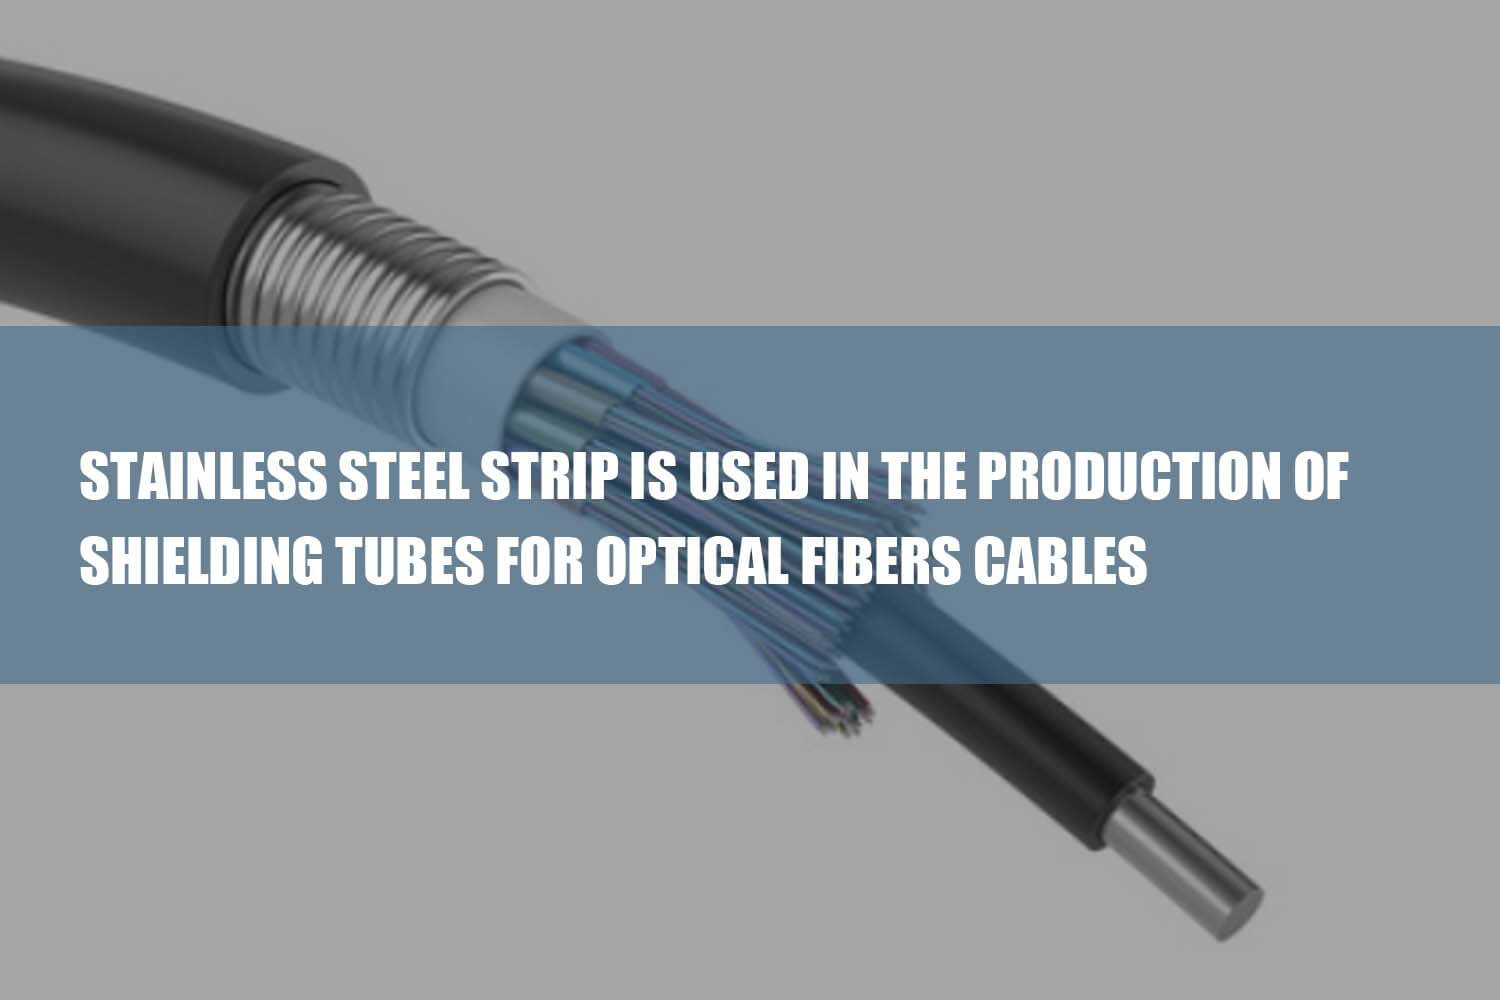 stainless steel strip is used in the production of shielding tubes for optical fibers cables